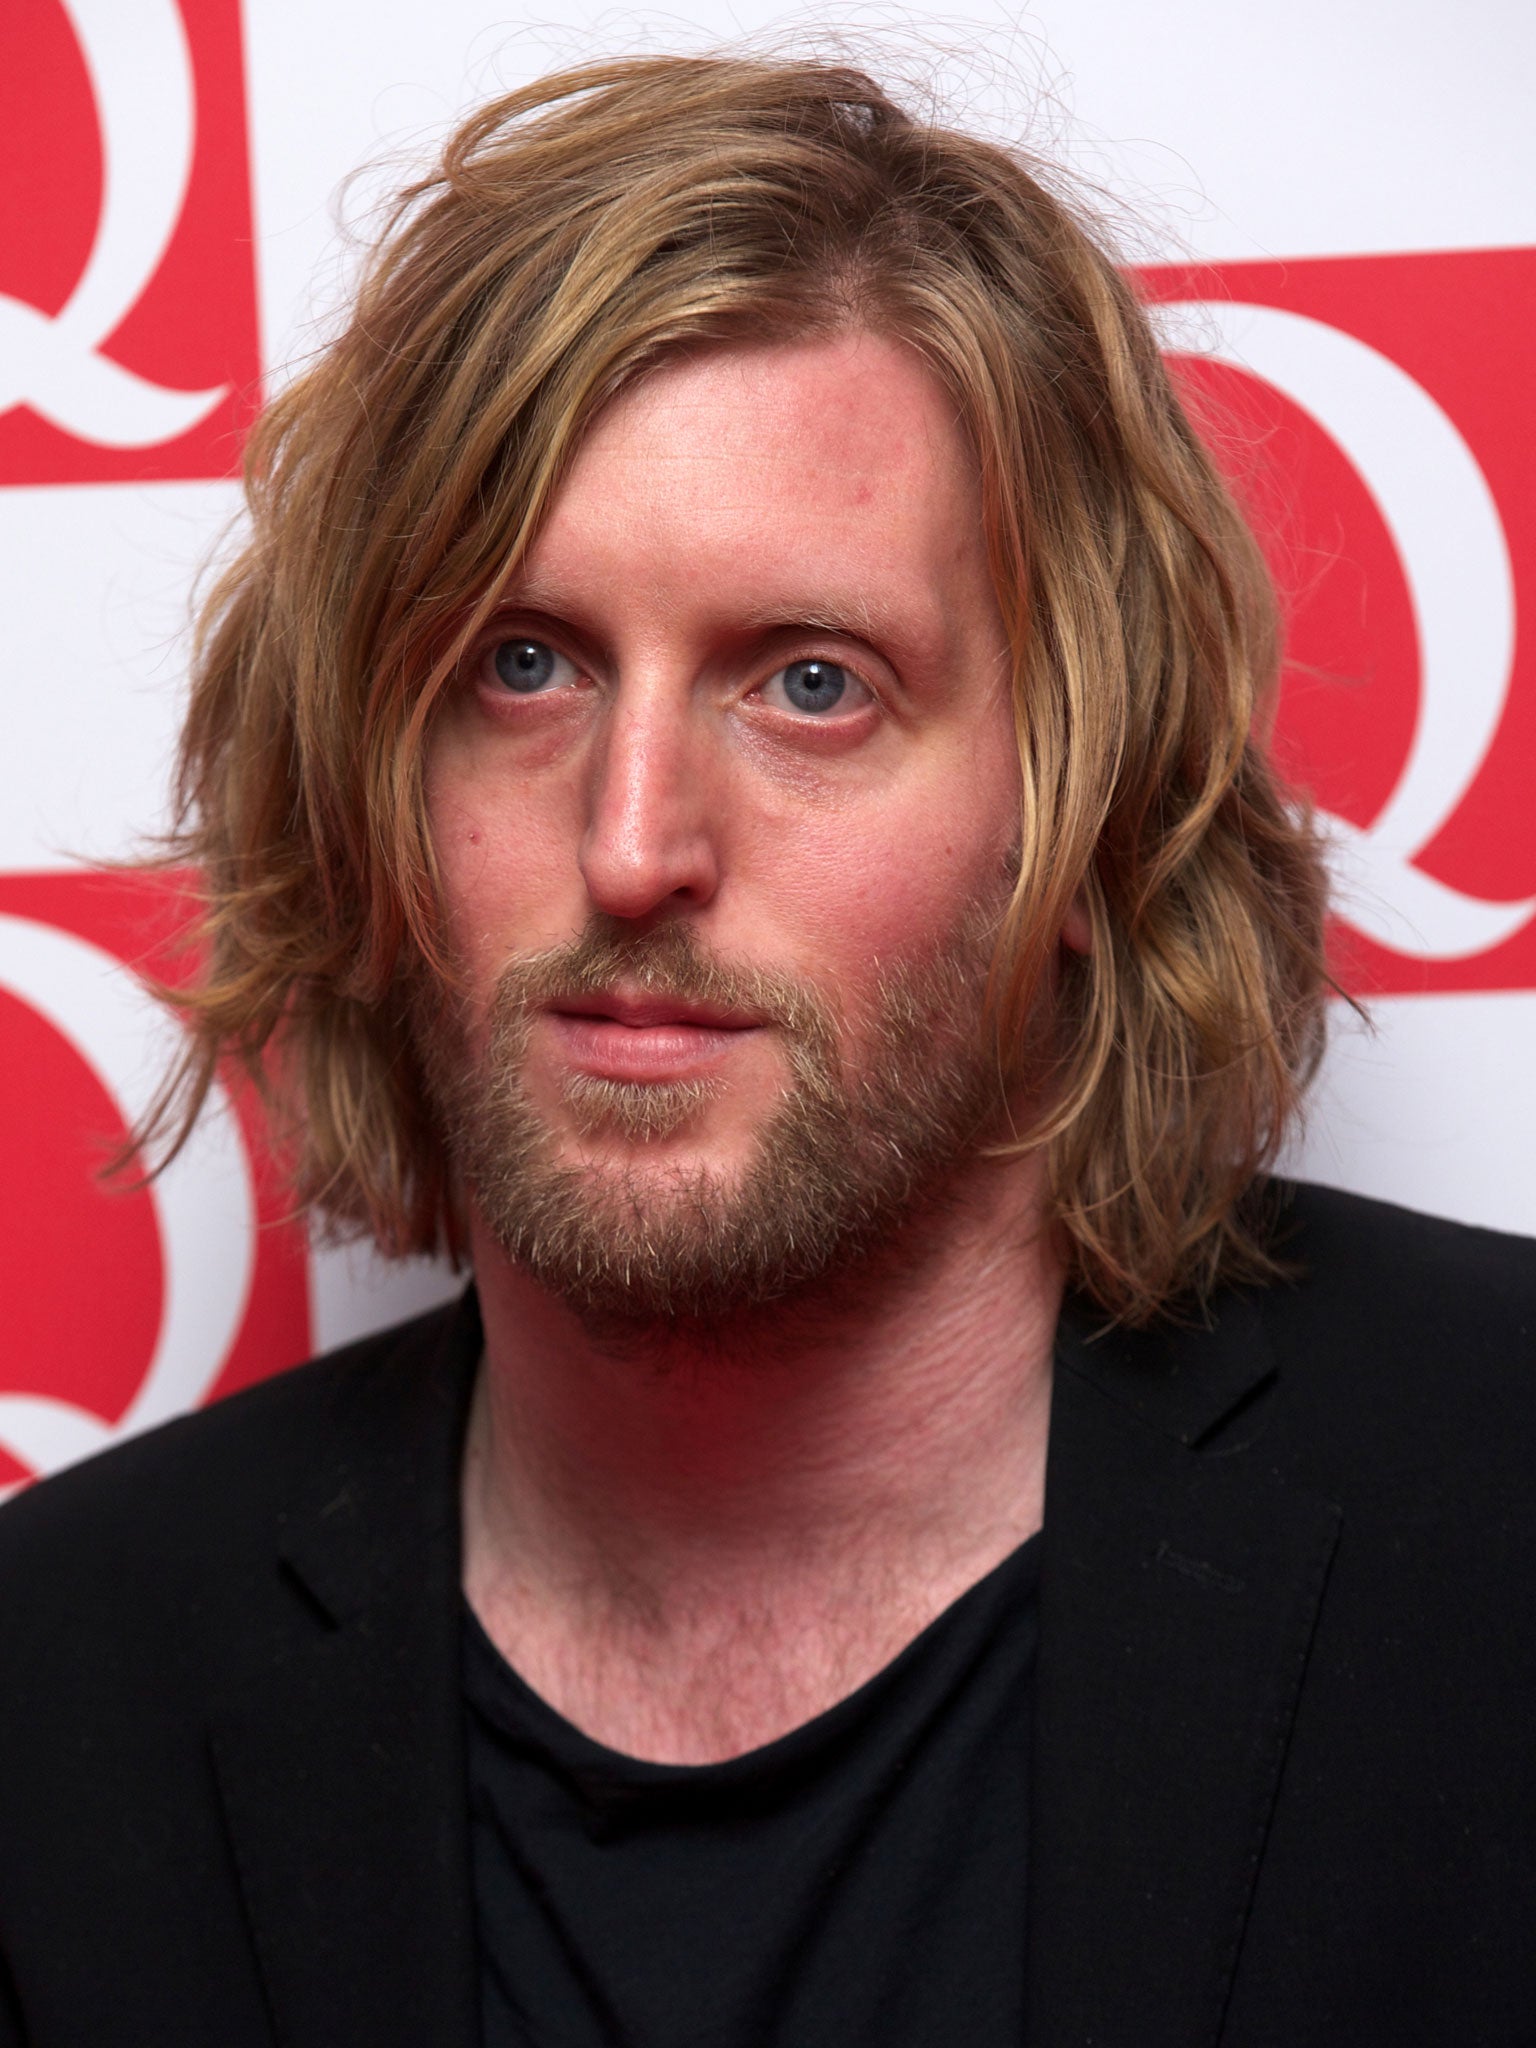 Andy Burrows tested his songs on his daughter, Chloe